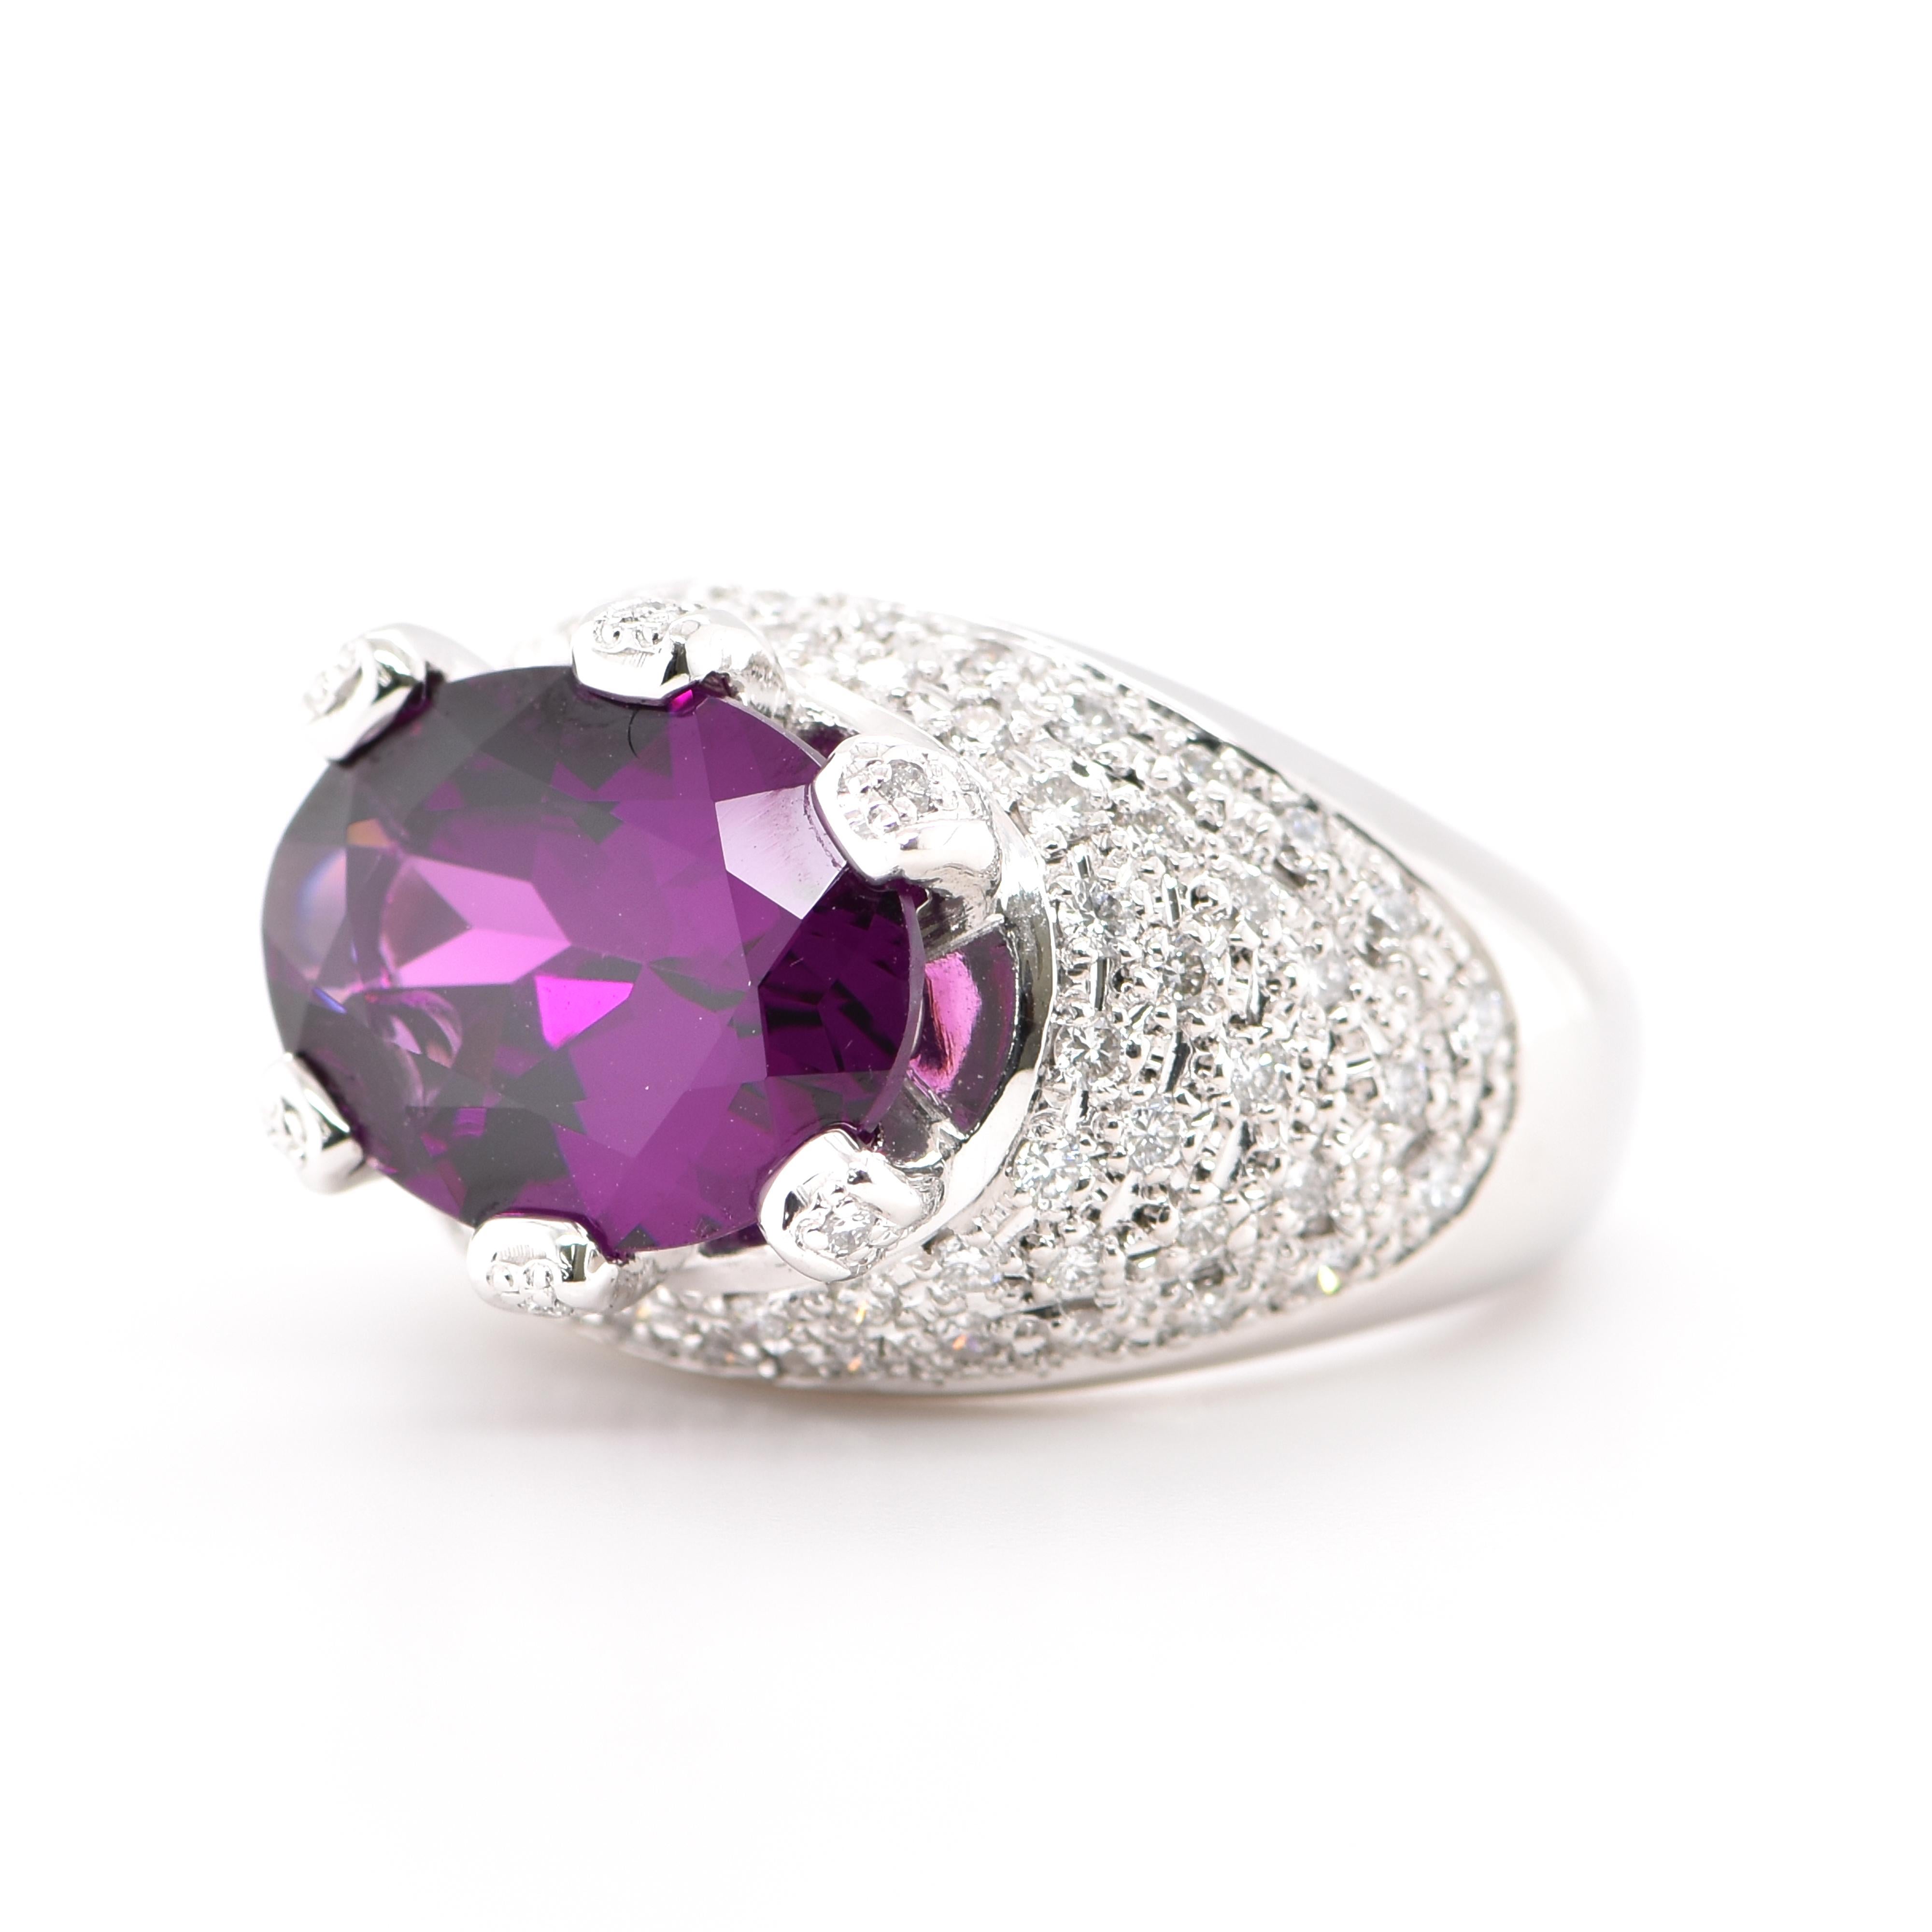 An absolutely gorgeous Cocktail Ring featuring a 7.01 Carat Natural Rhodolite Garnet and 0.96 Carats of Diamond Accents set in Platinum. Garnets have been adorned by humans throughout history from Ancient Egypt, Rome and Greece. They come in a wide